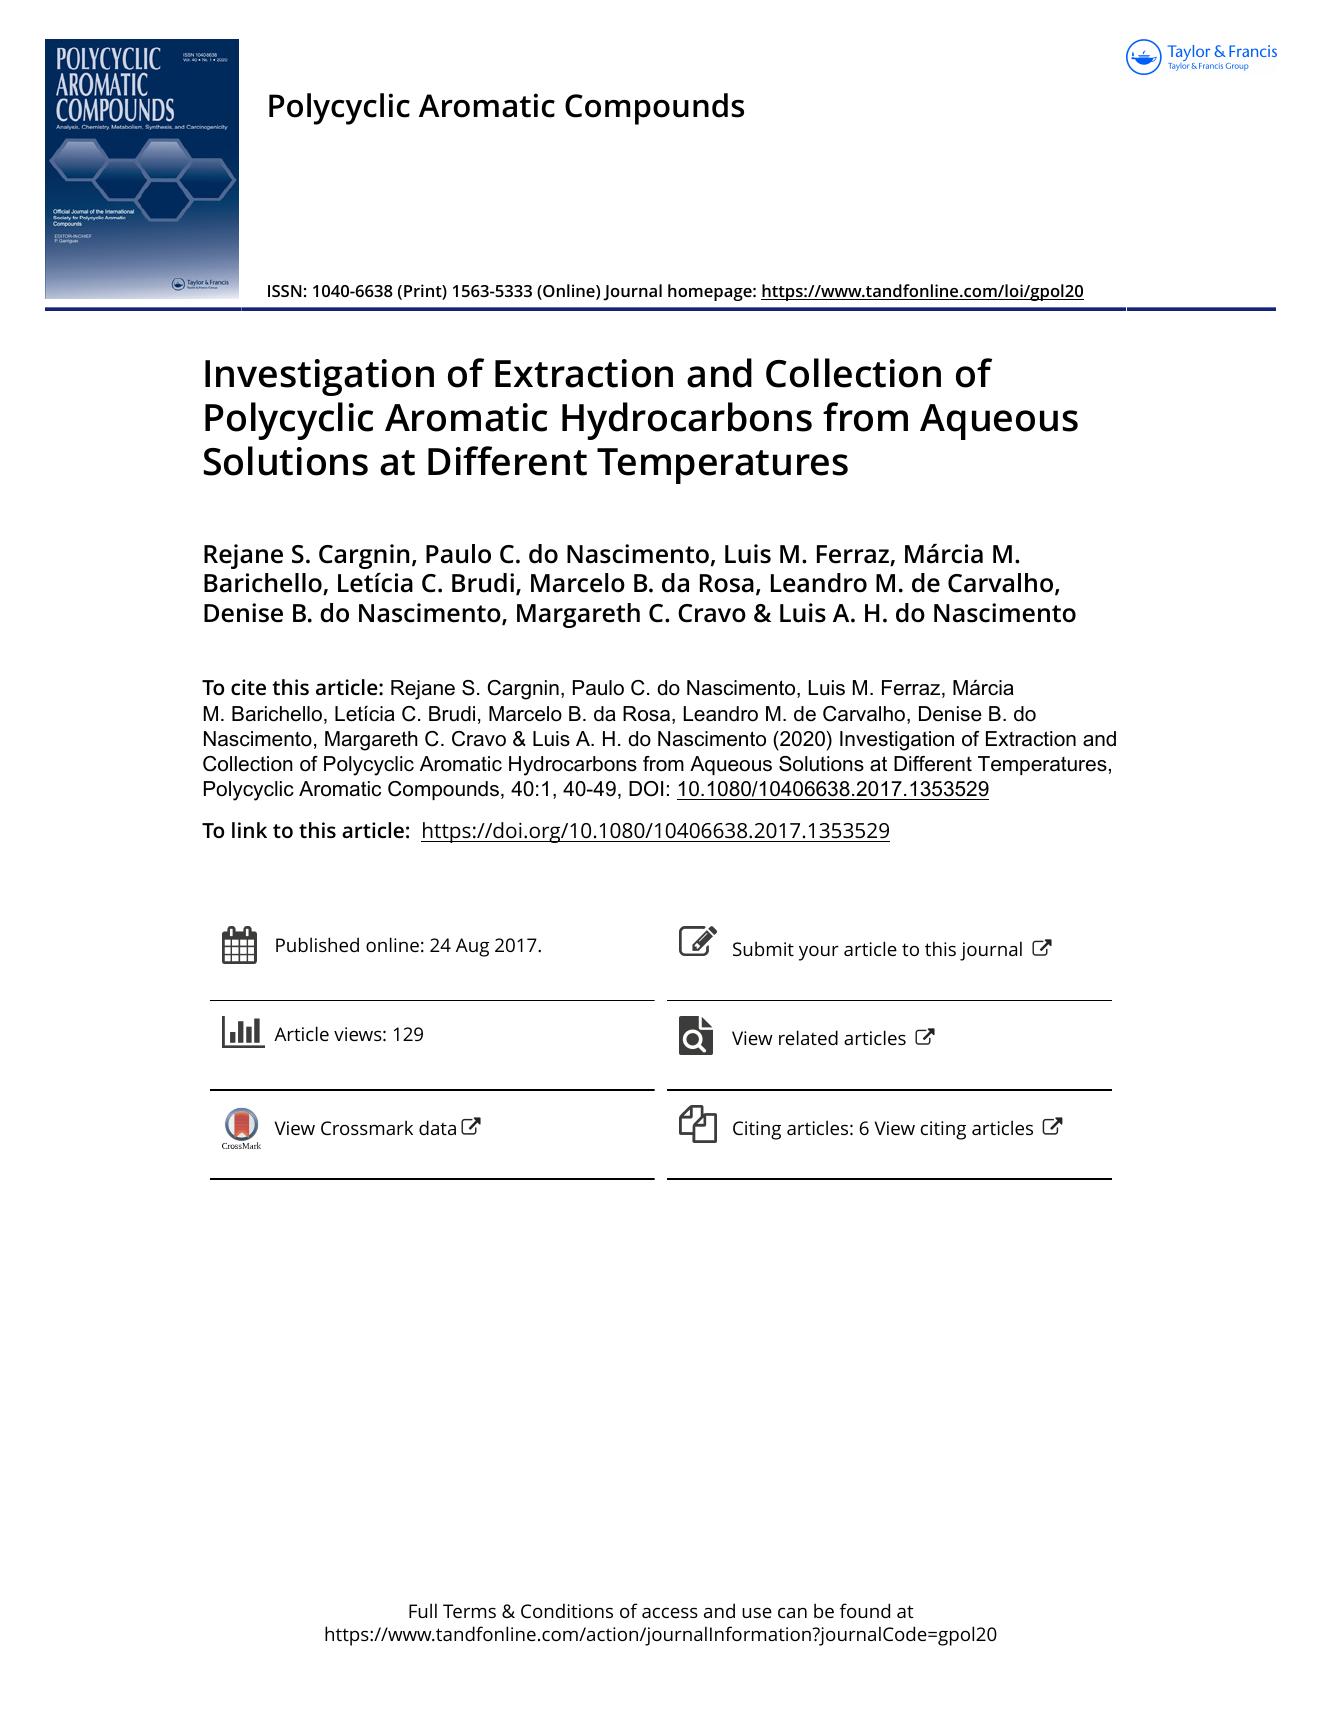 Investigation of Extraction and Collection of Polycyclic Aromatic Hydrocarbons from Aqueous Solutions at Different Temperatures by unknow